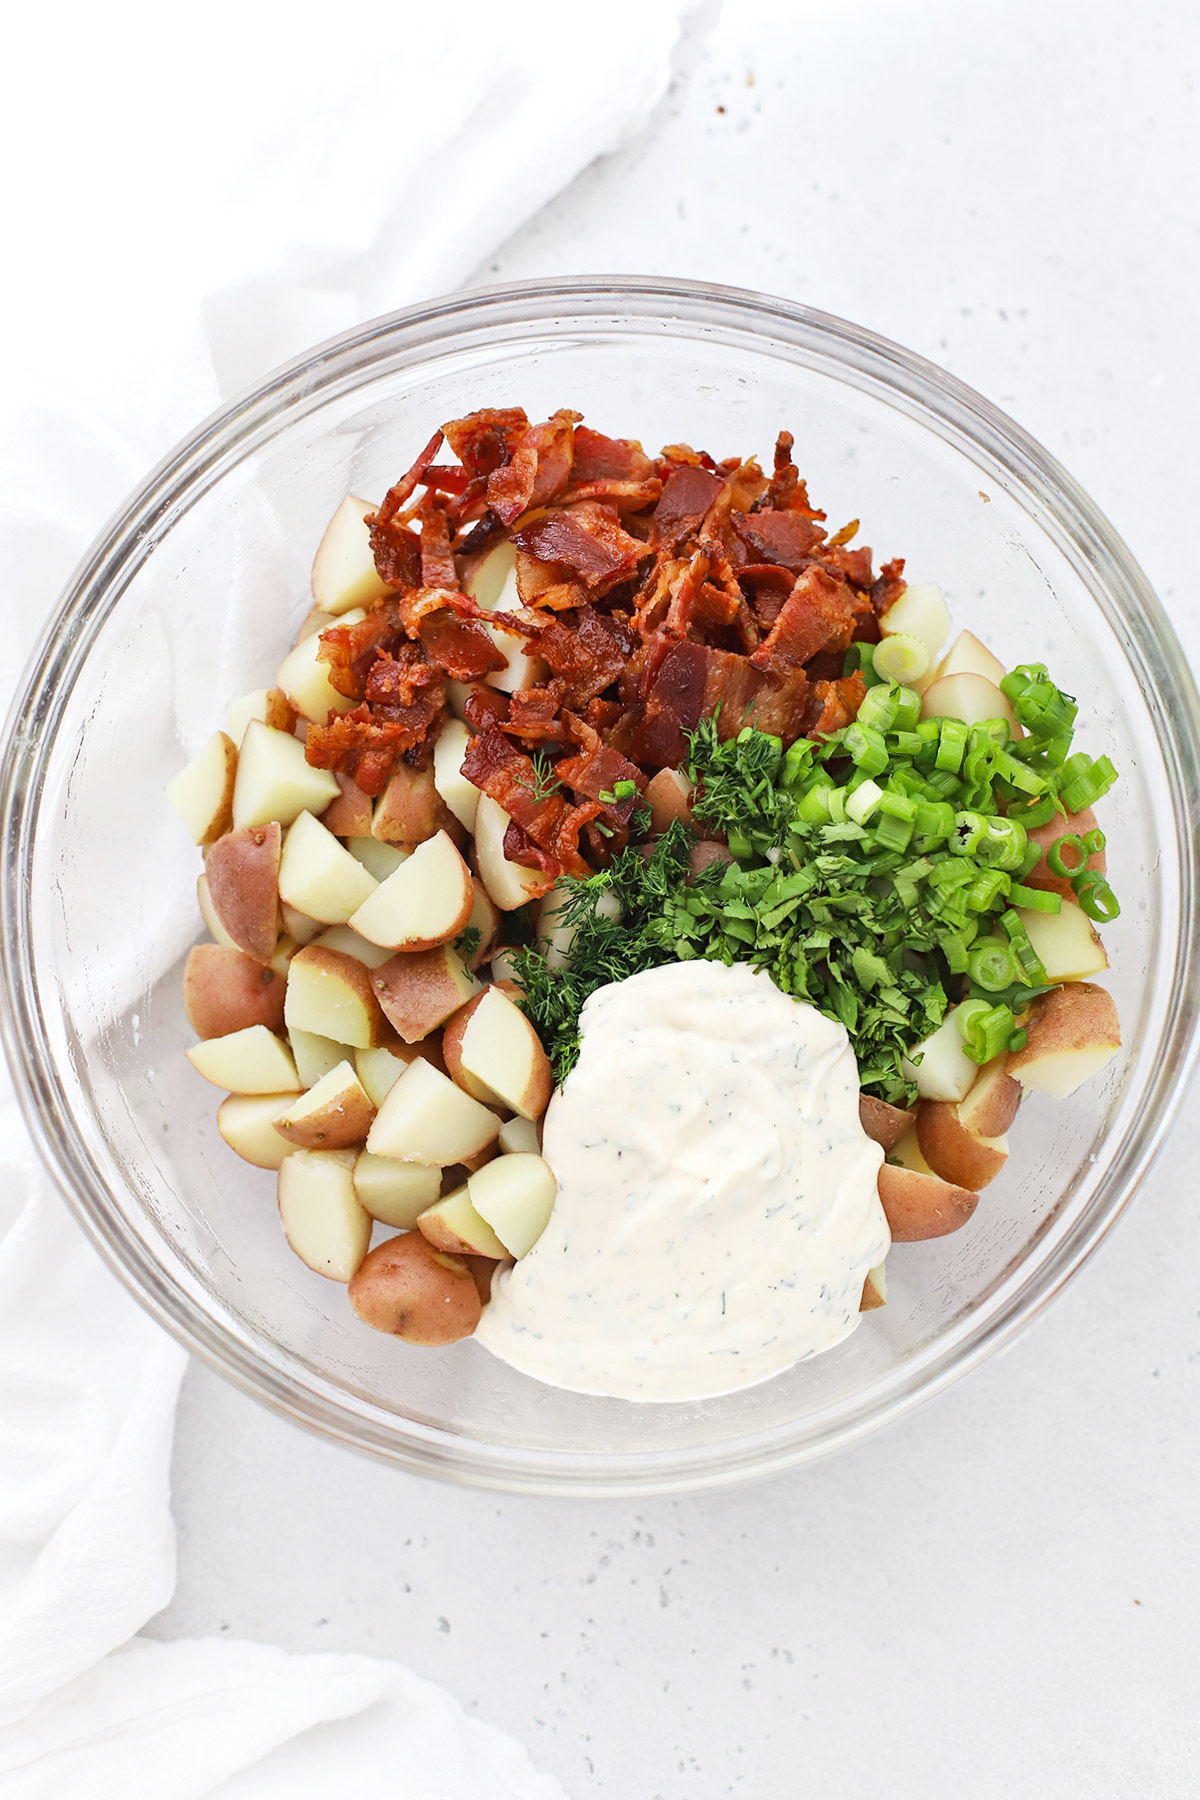 Ingredients for bacon ranch potato salad in a glass bowl